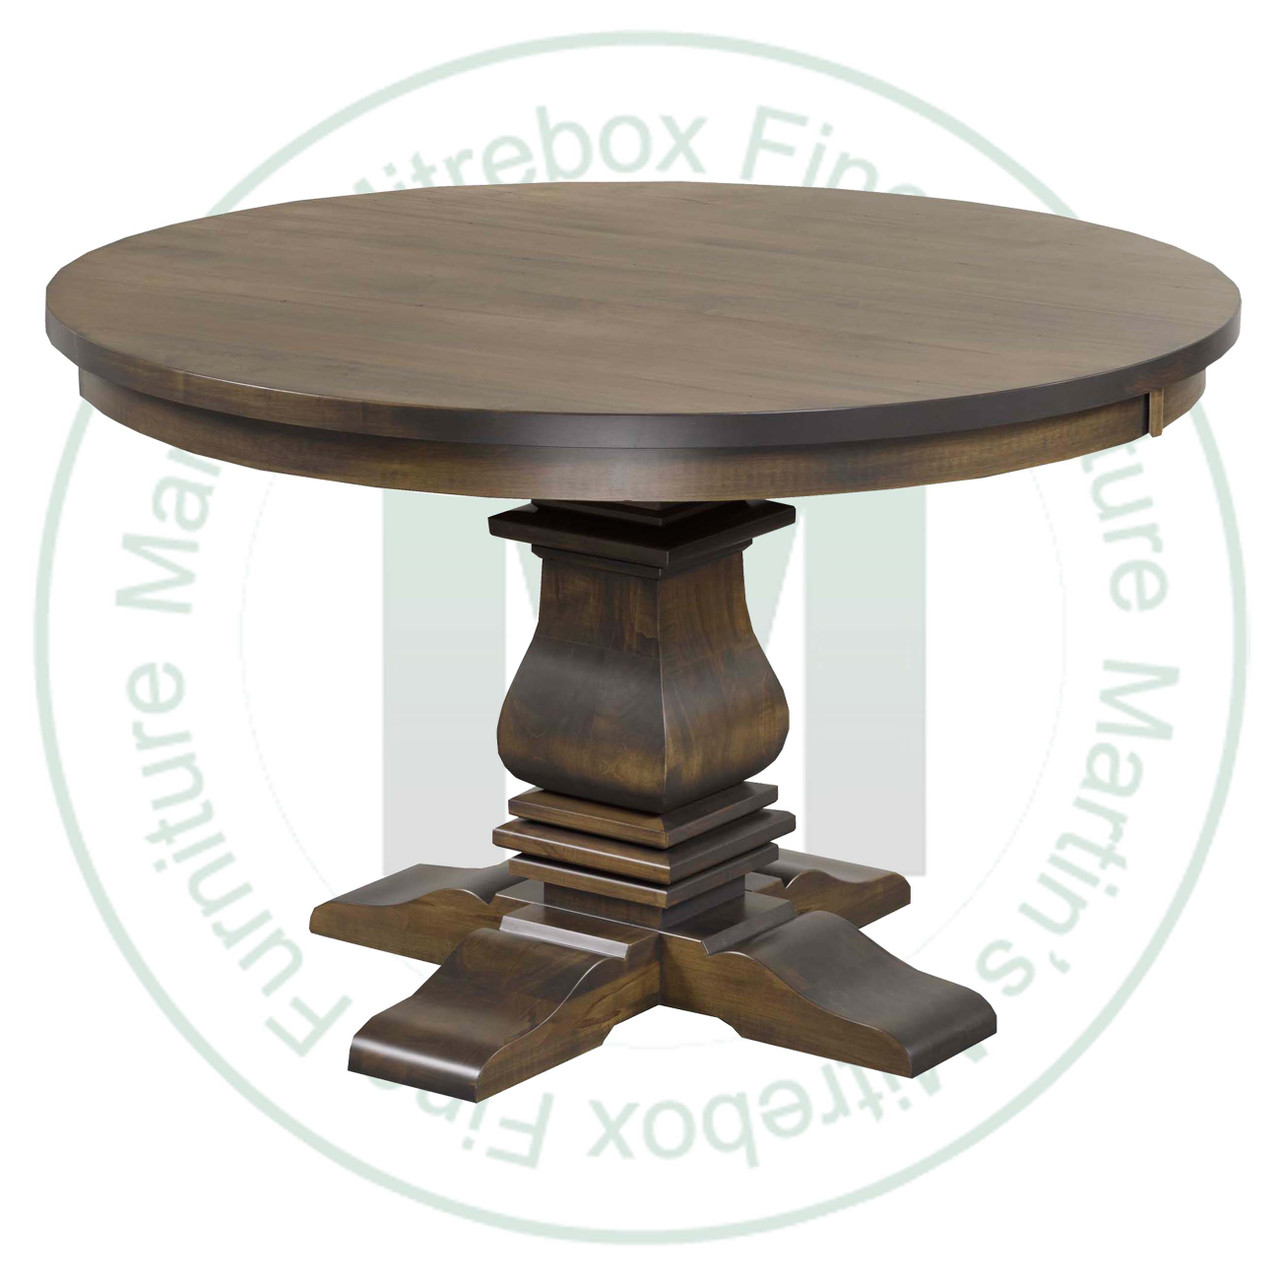 Oak Spartan Collection Single Pedestal Table 42''D x 48''W x 30''H With 1 - 12'' Leaf. Table Has 1.25'' Thick Top